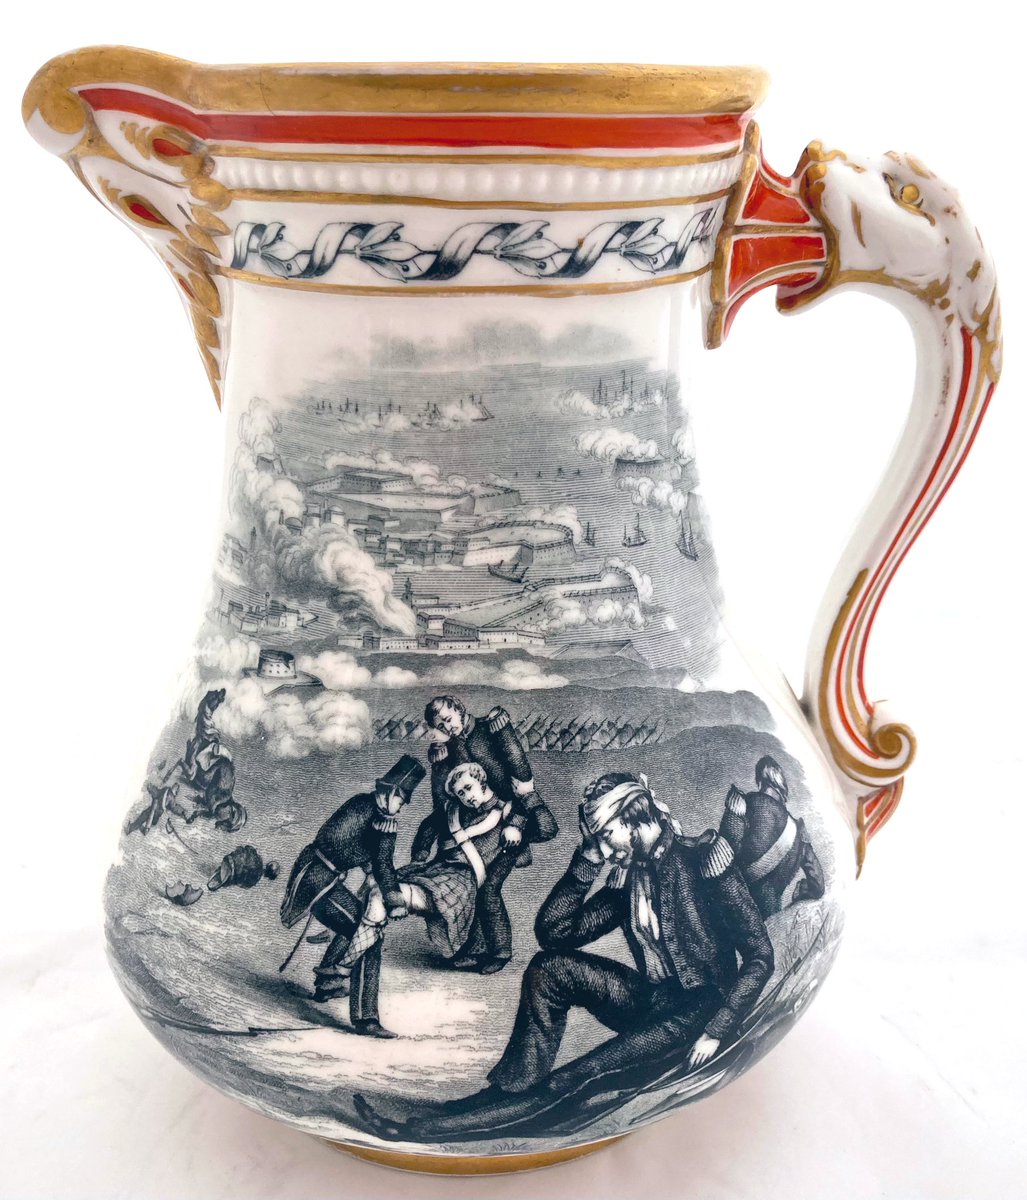 A Victorian Royal Patriotic Fund jug to raise funds for the families of soldiers killed in the Crimean War, circa 1855. #antiques #CrimeanWar